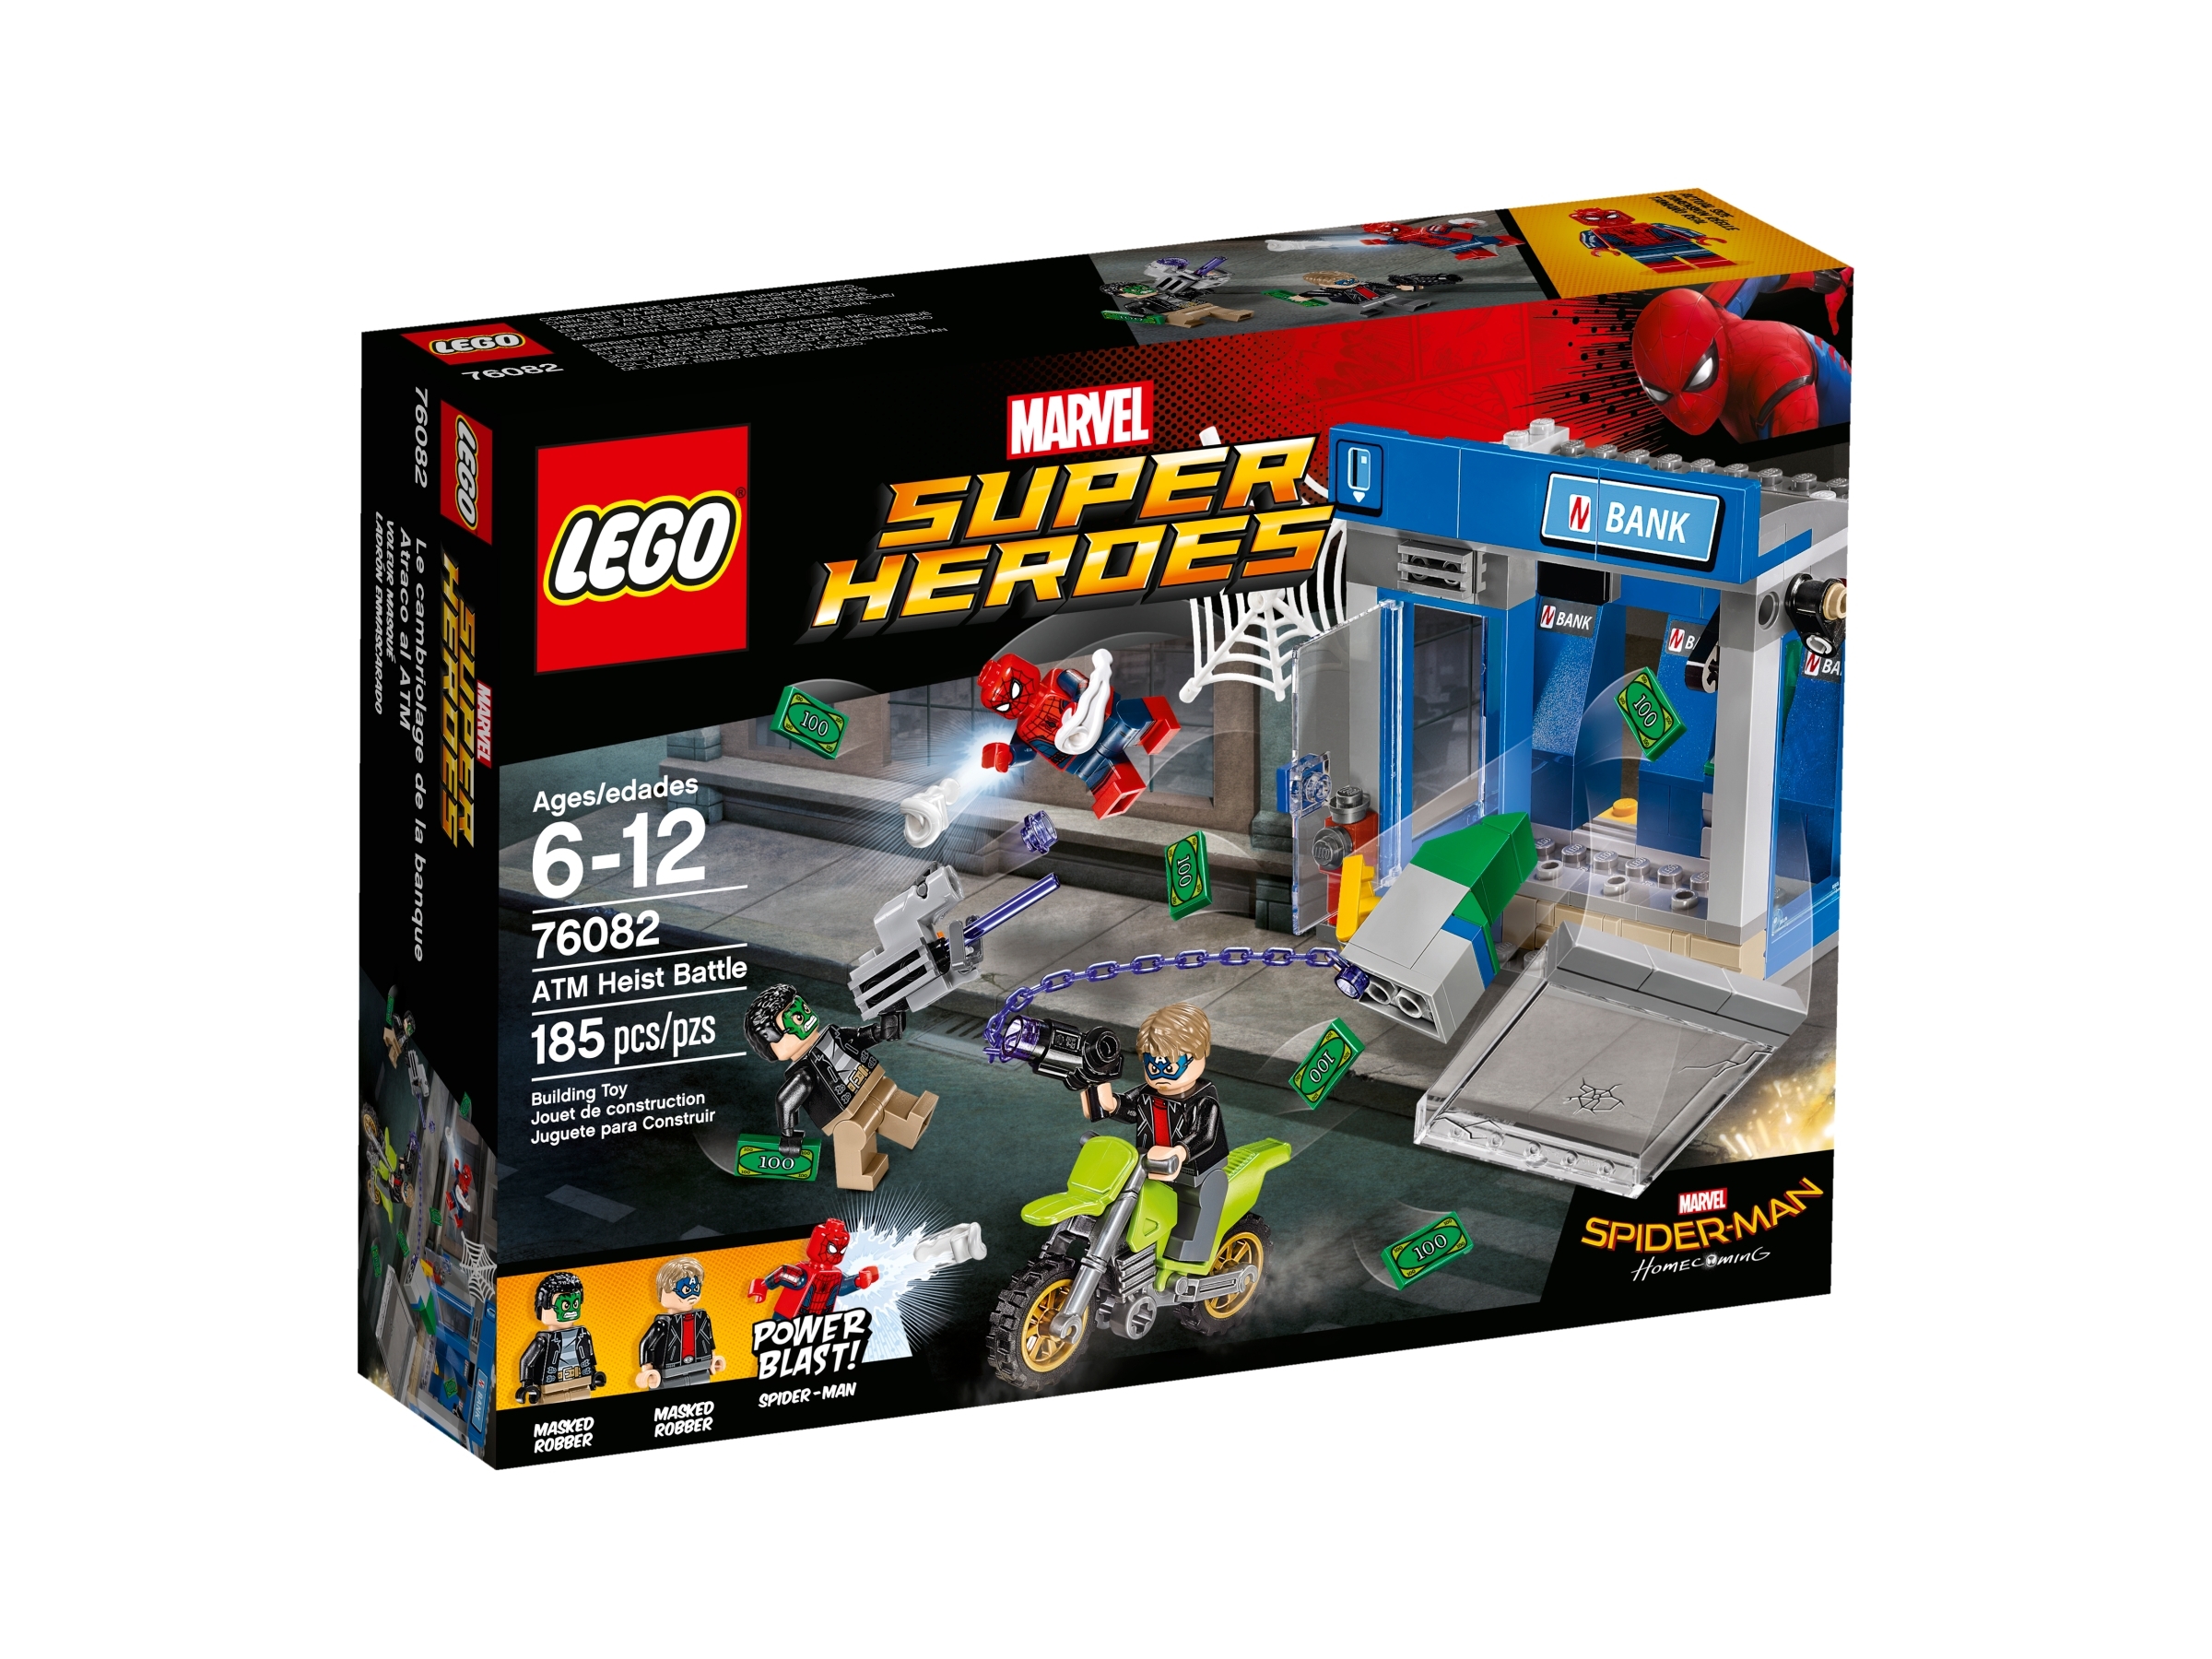 sh420 NEW LEGO SPIDER-MAN FROM SET 76082 SPIDER-MAN HOMECOMING 